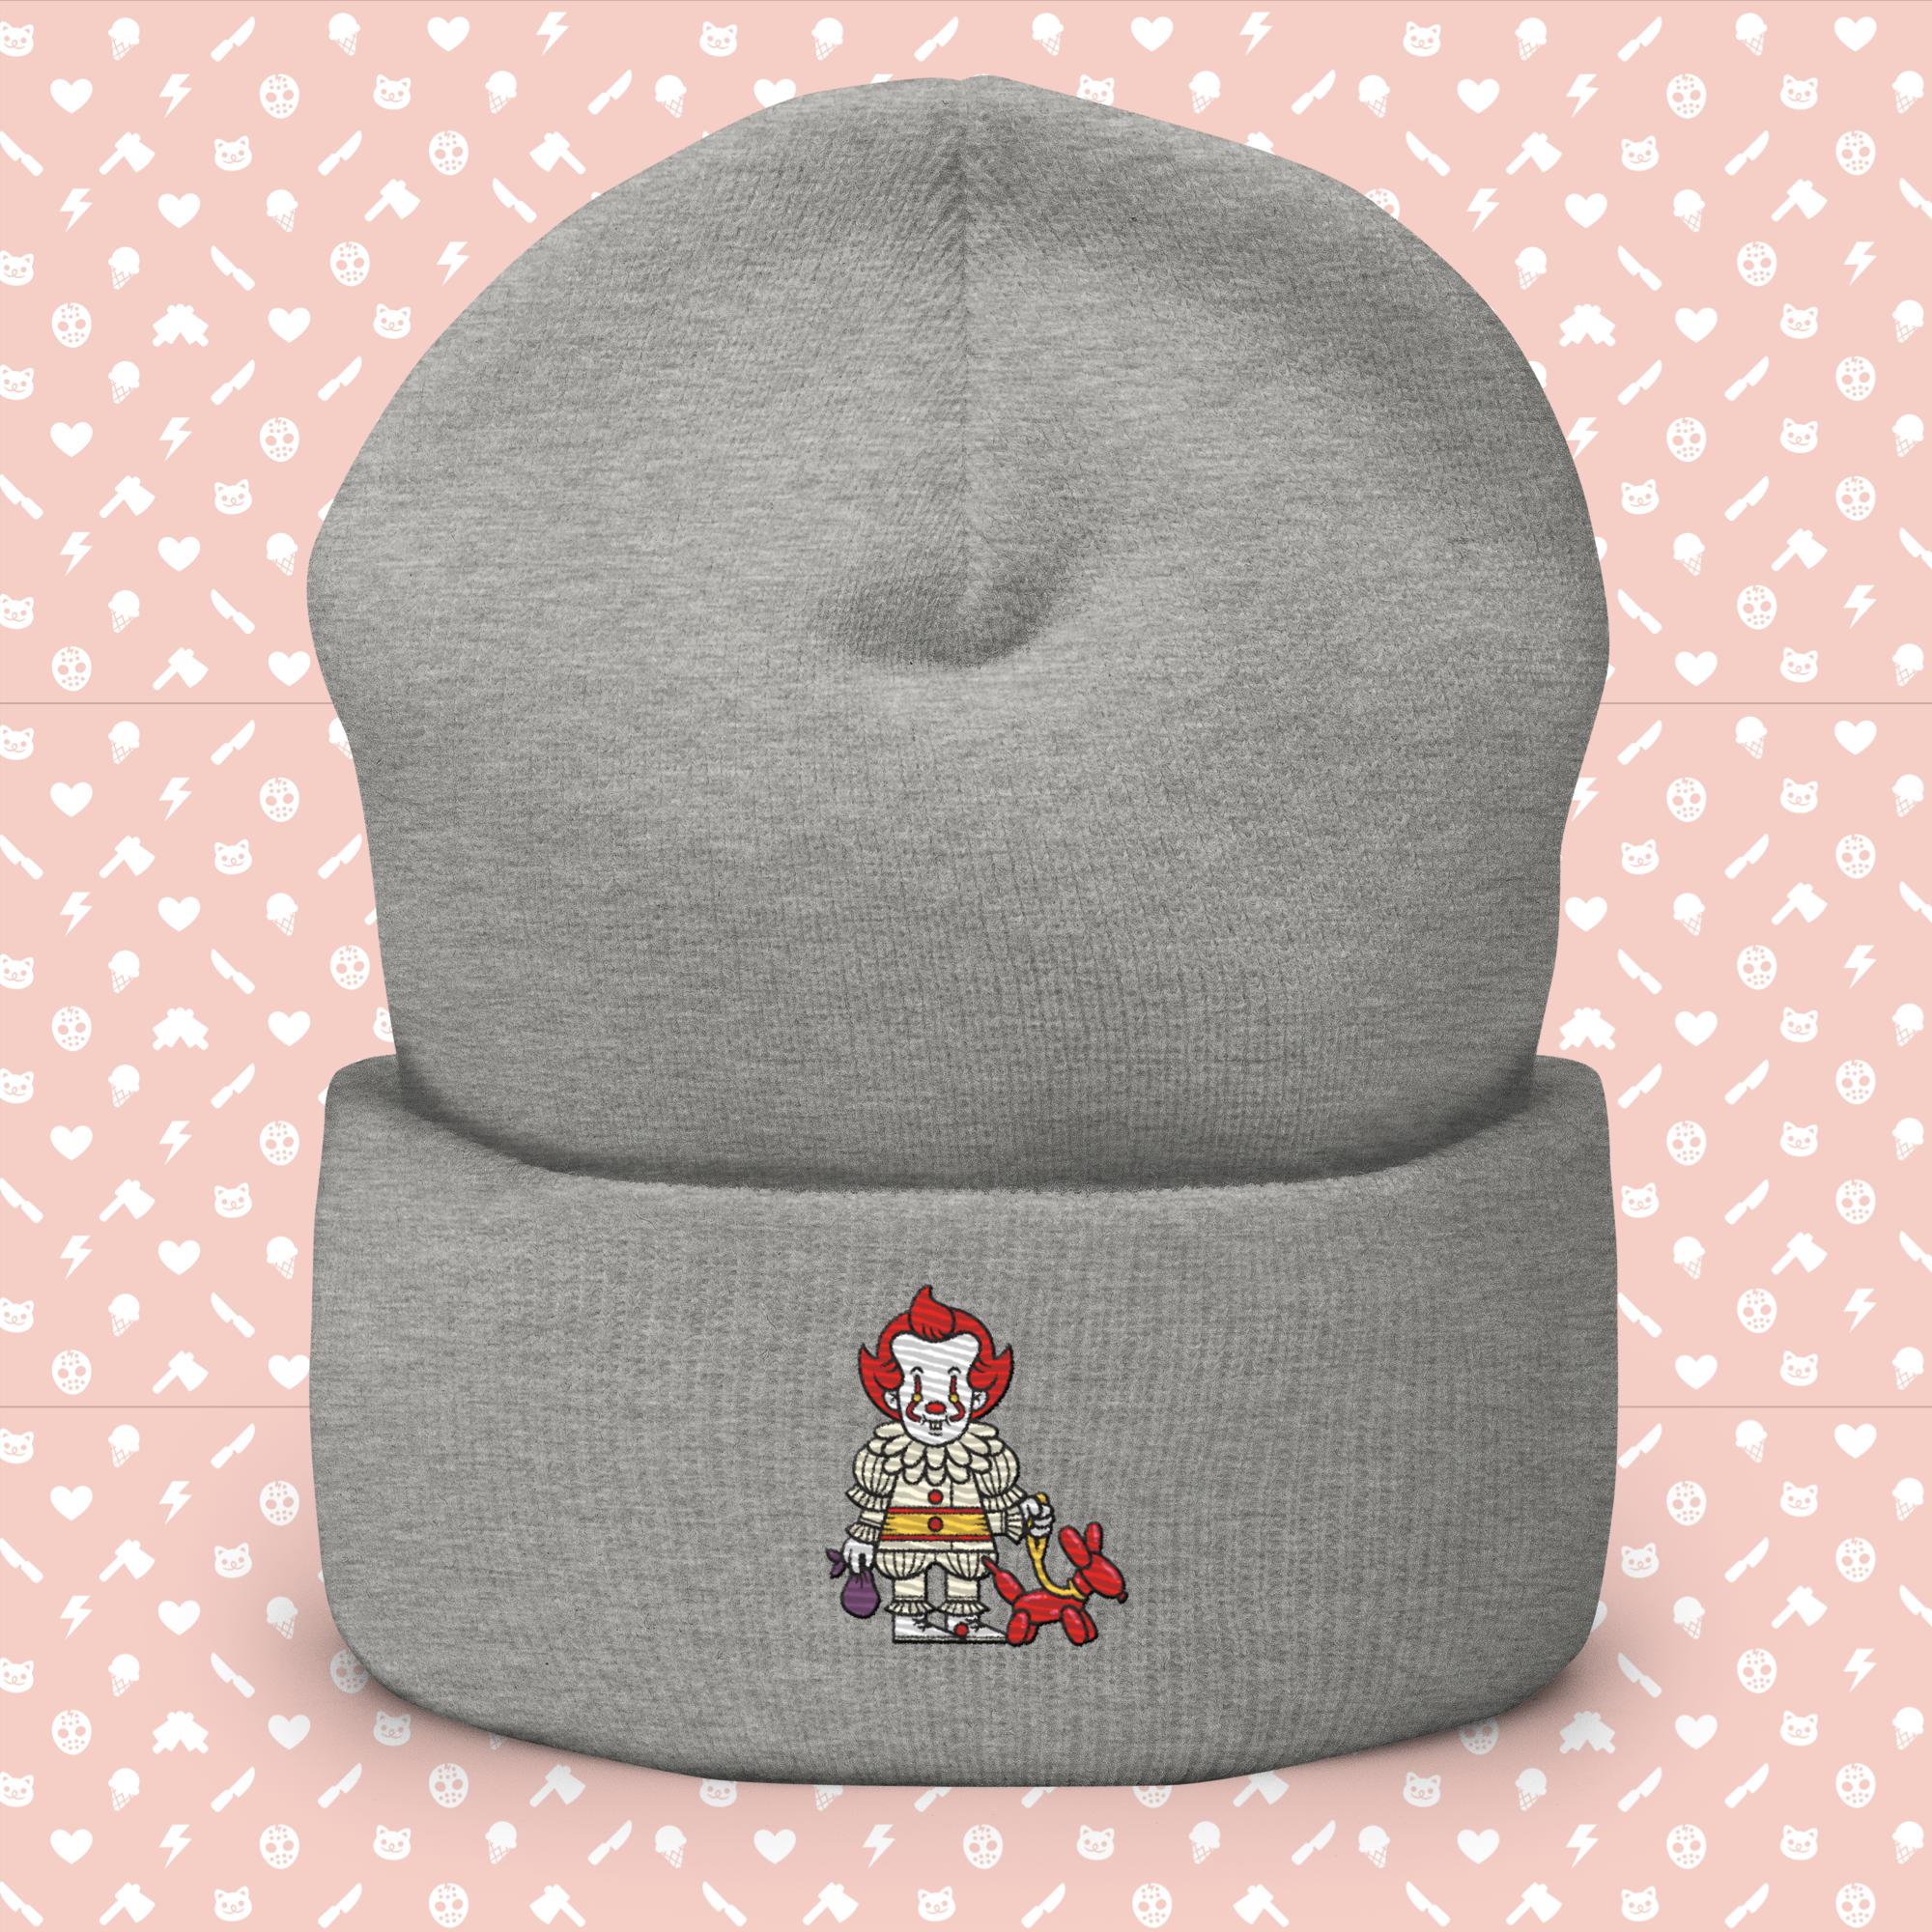 We All Poop Down Here Pennywise Embroidered Cuffed Beanie